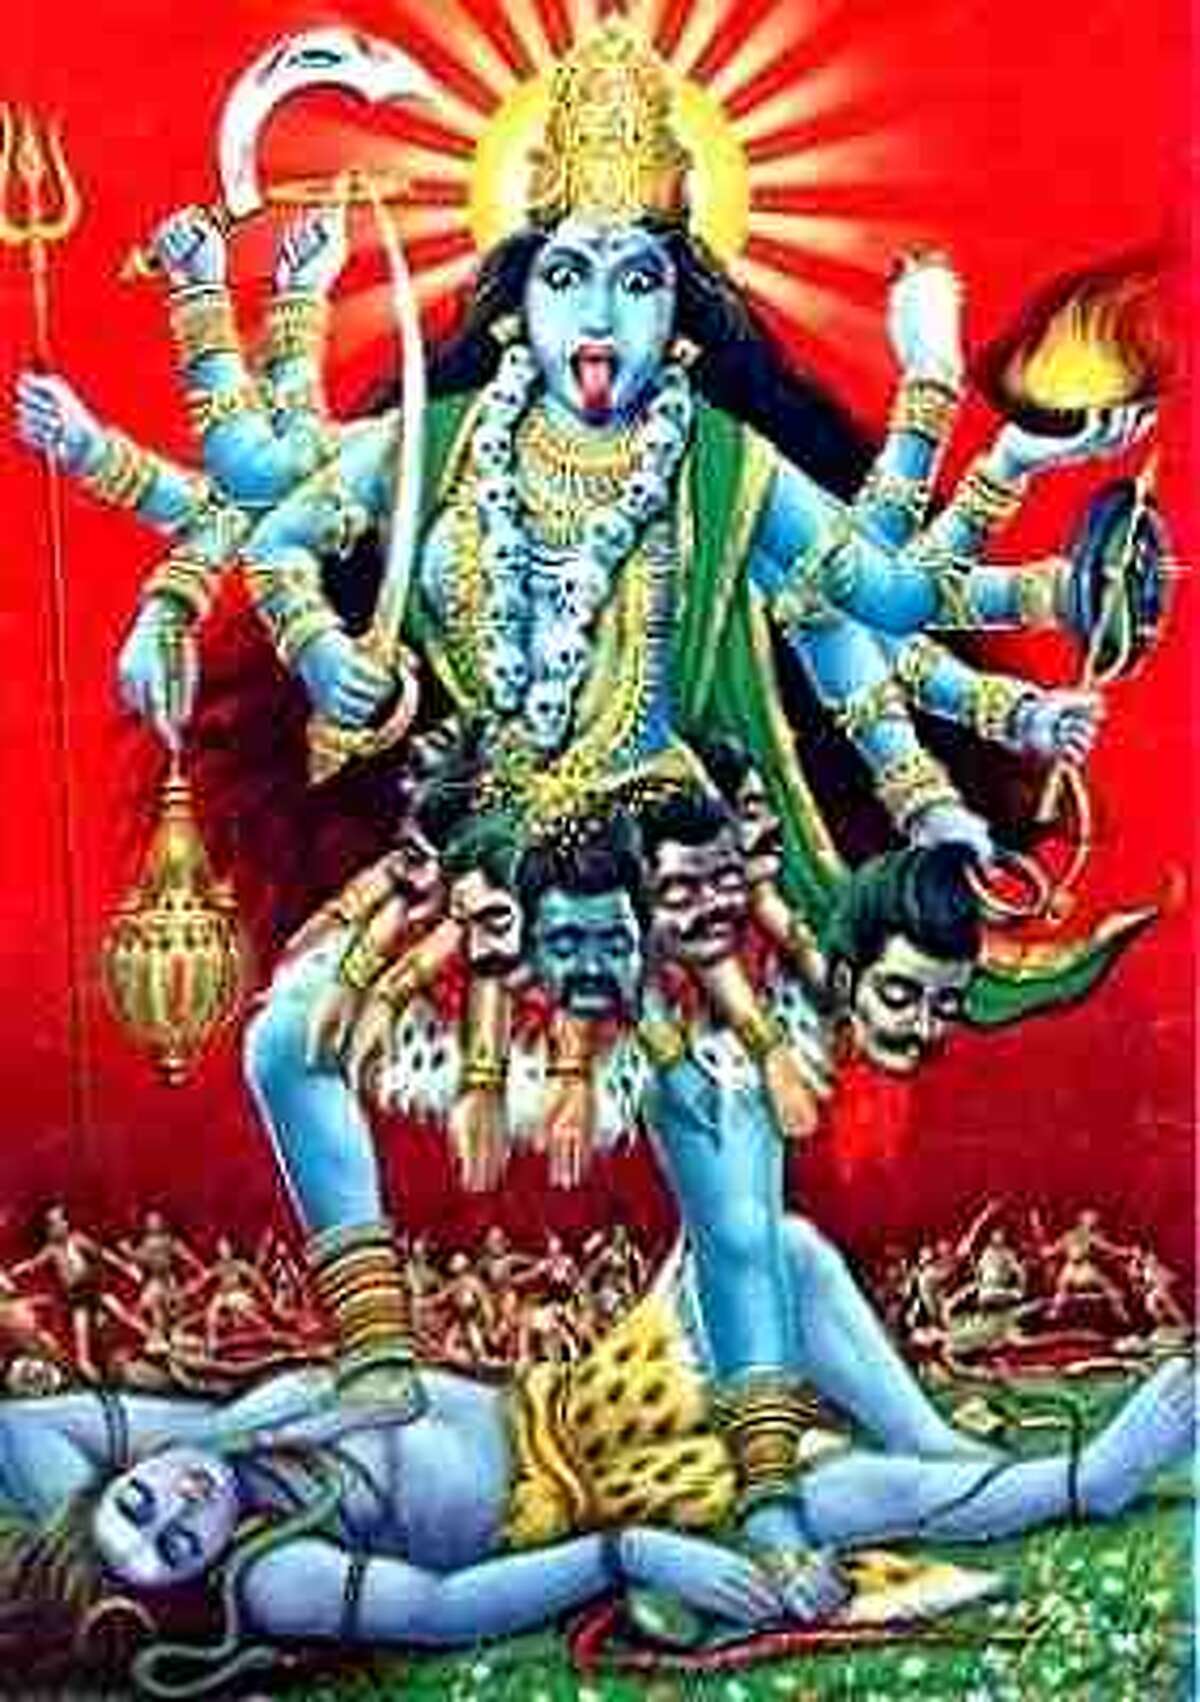 Hindu goddess Kali may look intimidating--partly because she likes to wear a necklace of human skulls--but she is famous as a slayer of evil and champion of the good. When a Hindu swastika faces left, it denotes a connection to some elements of Kali. If it faces right, it is a symbol of luck and prosperity, once a common decoration for wedding invitations. Many in the Hindu community want New York school curriculum about symbols of hate to explain to students that the Hindu swastika is an ancient holy symbol with no relationship to the Nazis.